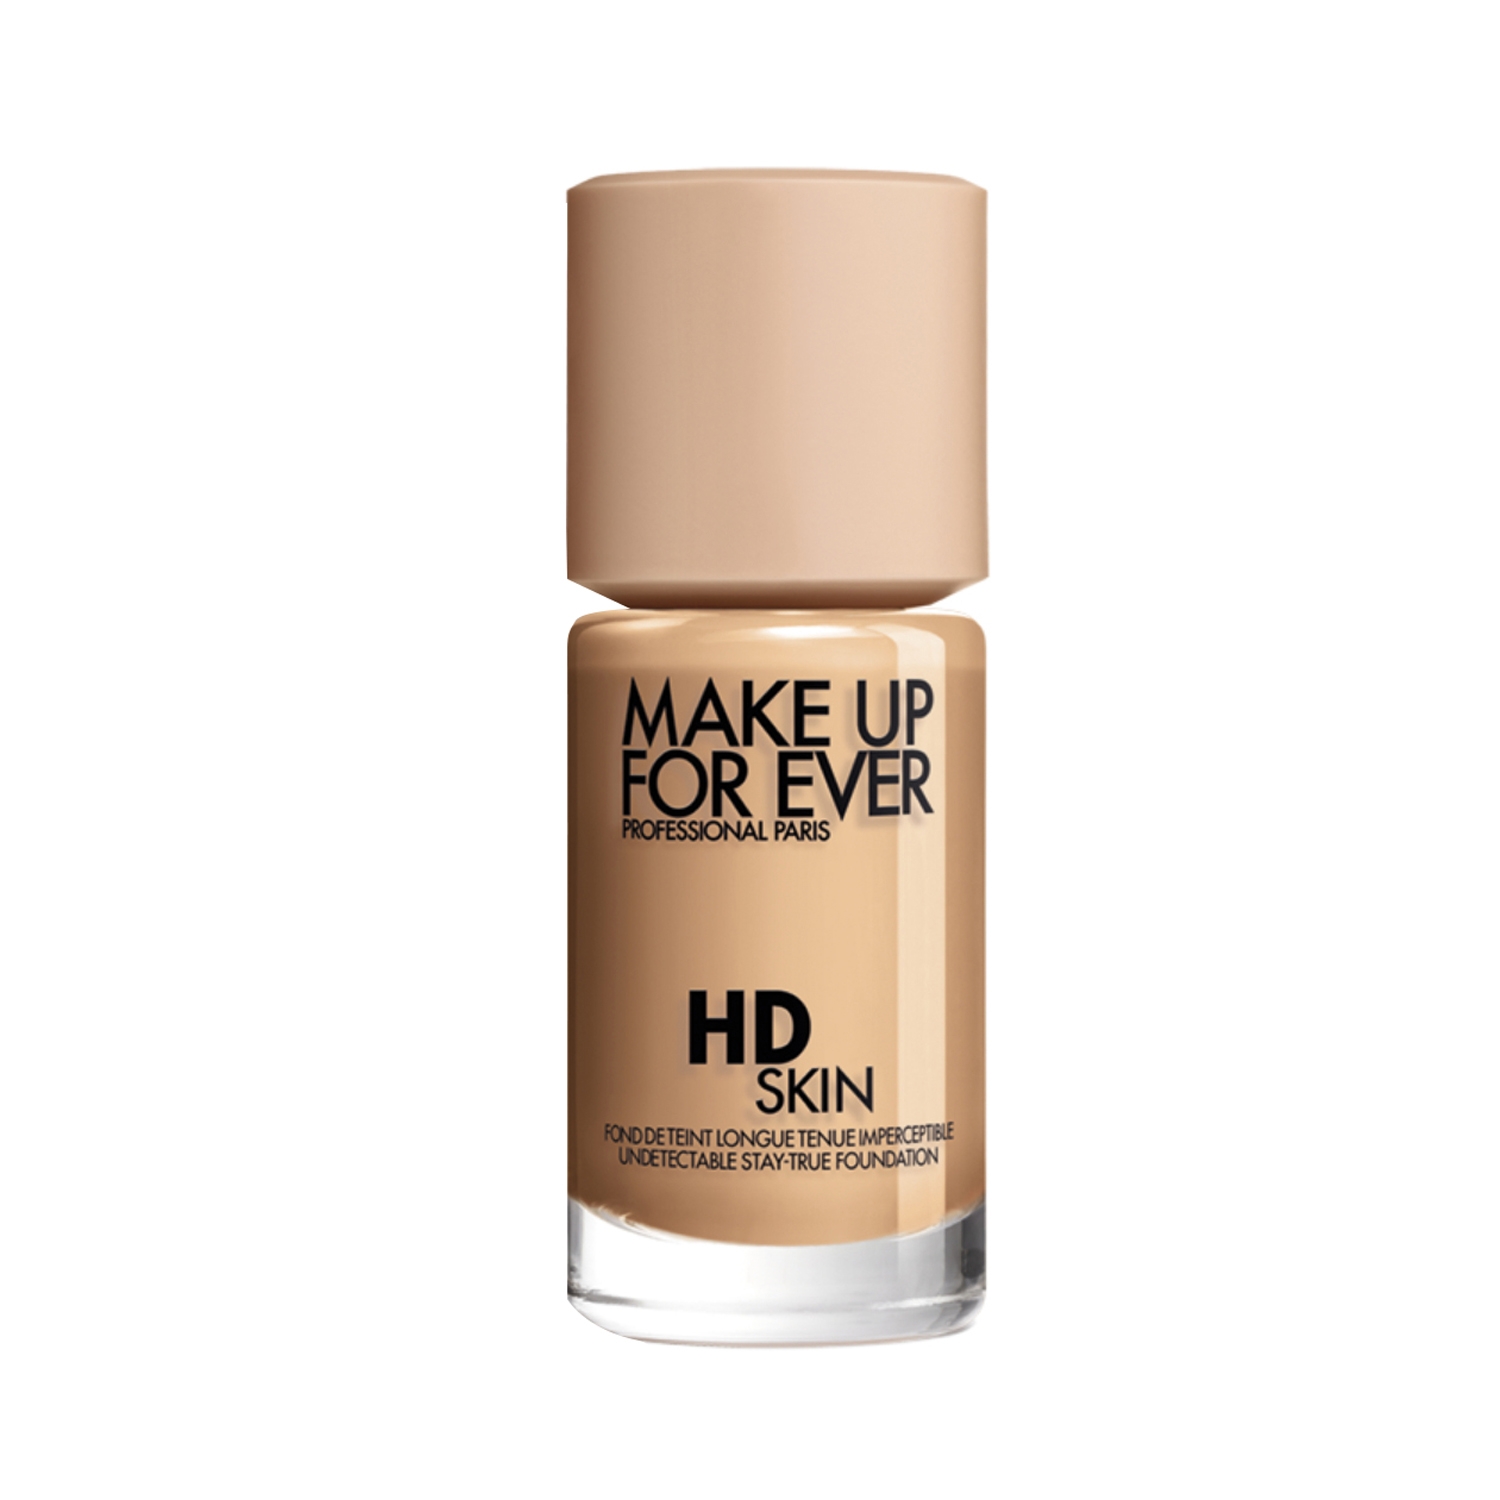 Make Up For Ever | Make Up For Ever Hd Skin Foundation-2Y30 (Y345) (30ml)